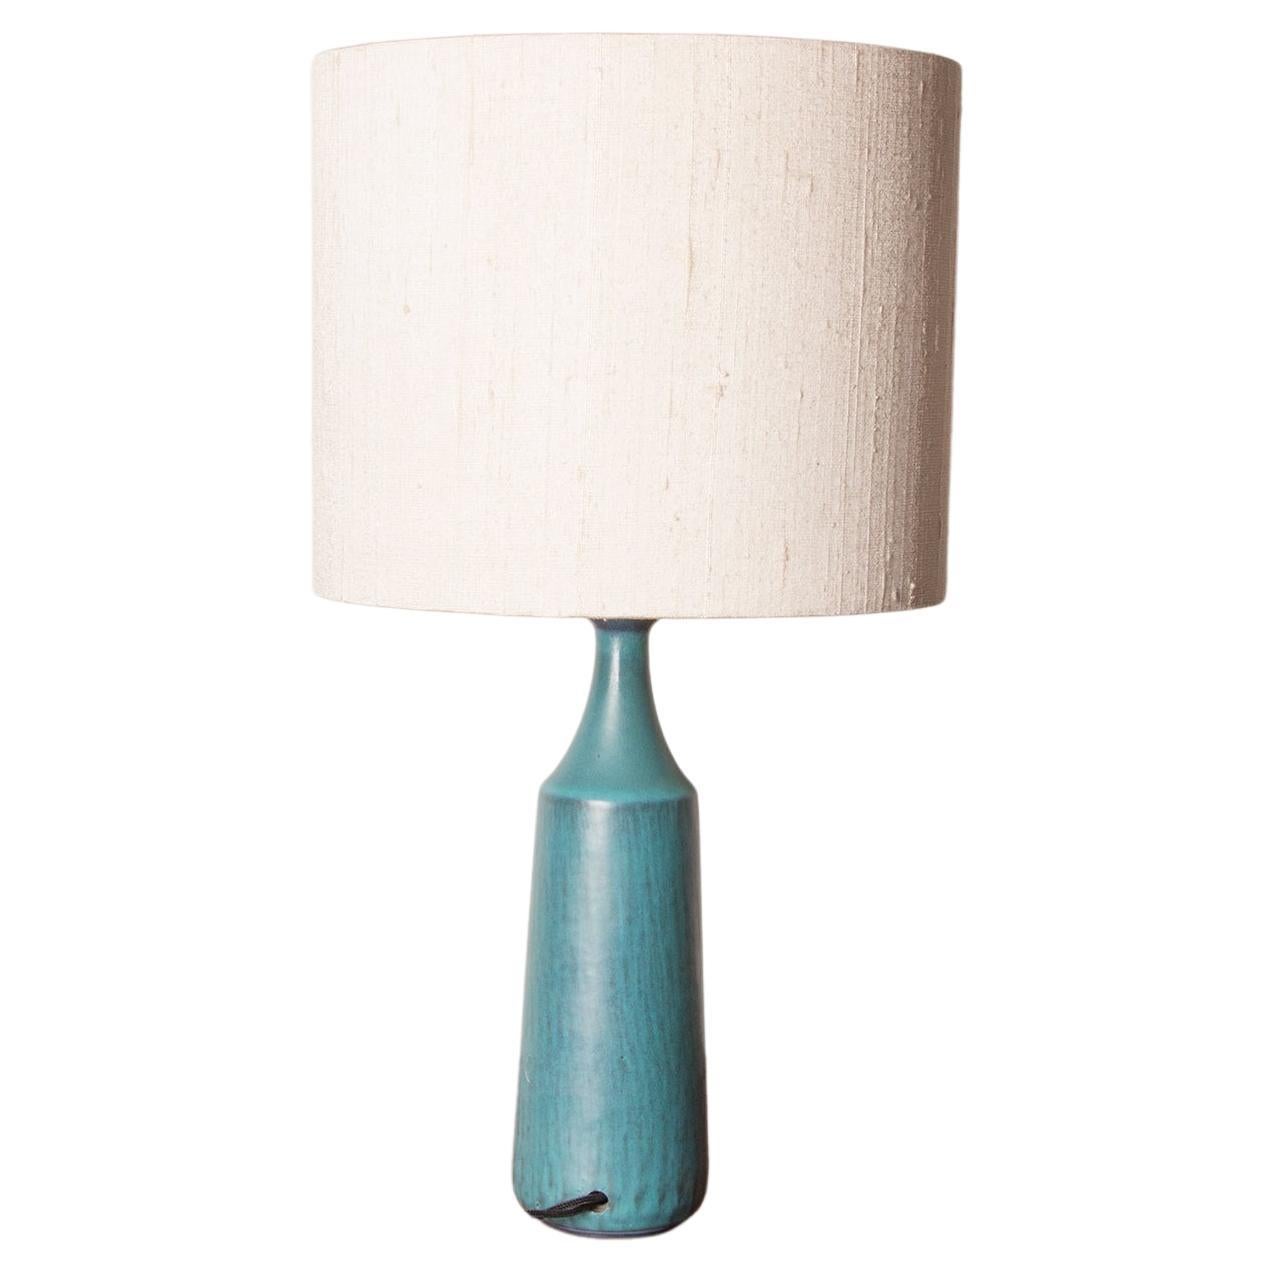 Danish truncated conical table lamp in matte blue sandstone by Gunnar Nylund for